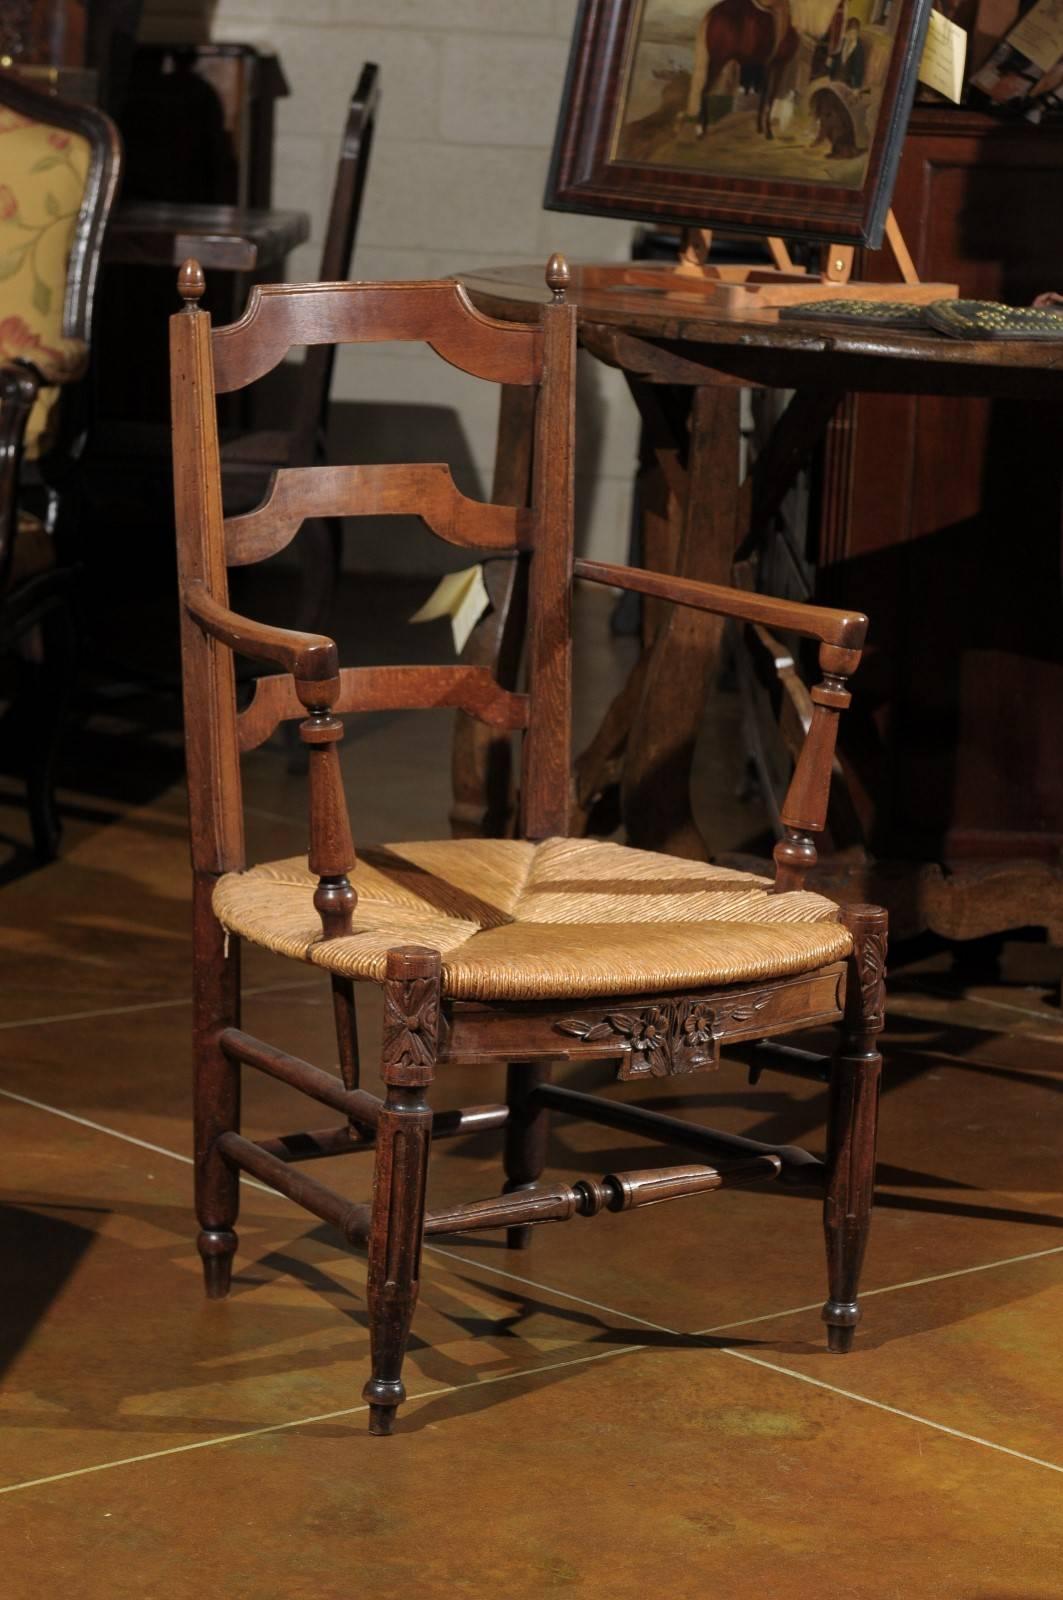 Mid-19th Century Louis XVI style walnut arm chair with ladder back, rush seat, fluted legs, and carved apron.